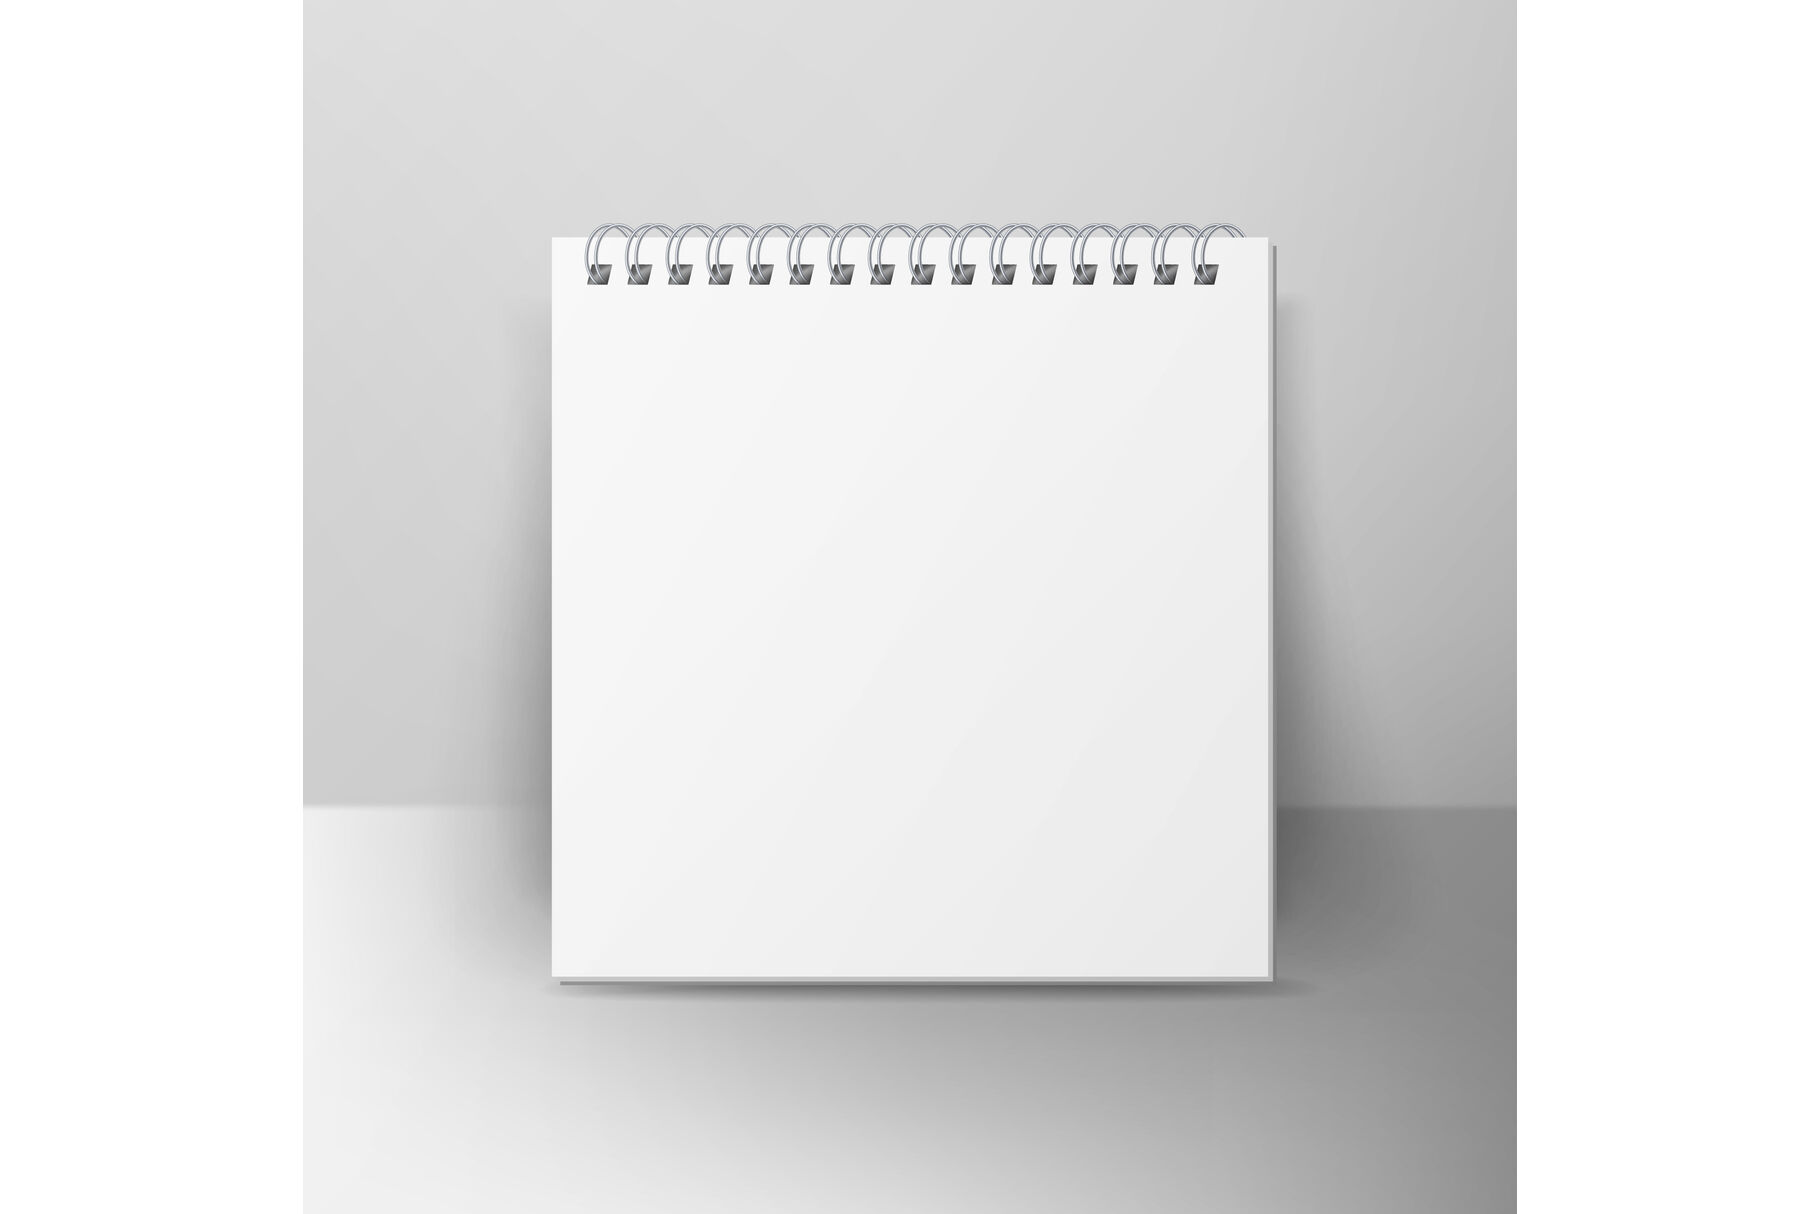 Premium Vector  Realistic blank horizontal open realistic spiral notepad .